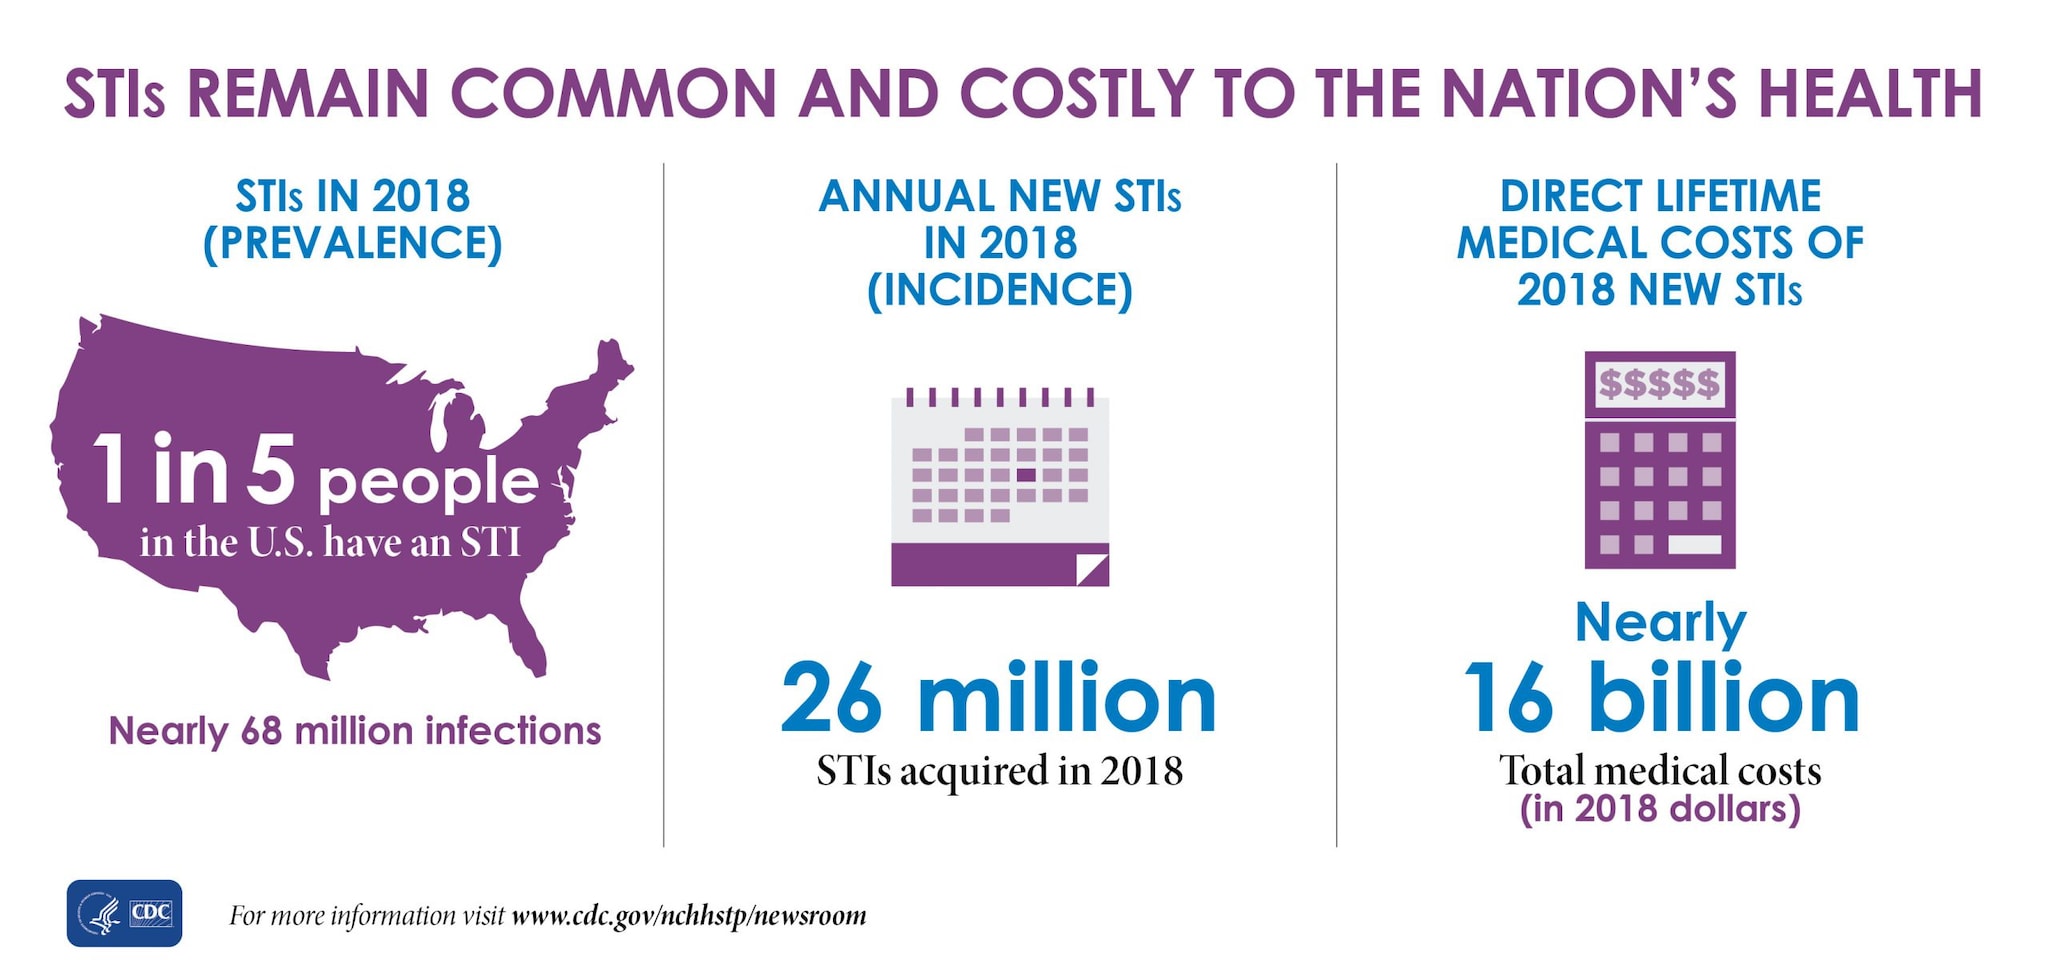 The graphic shows there were nearly 68 million infections in 2018 (prevalence), and that 1 in 5 people in the U.S. have an STI.   The graphic also shows that there were 26 million STIs acquired in 2018 (incidence).   And, the graphic shows that the direct lifetime medical costs of new STIs in 2018 totaled nearly $16 billion (in 2018 dollars).